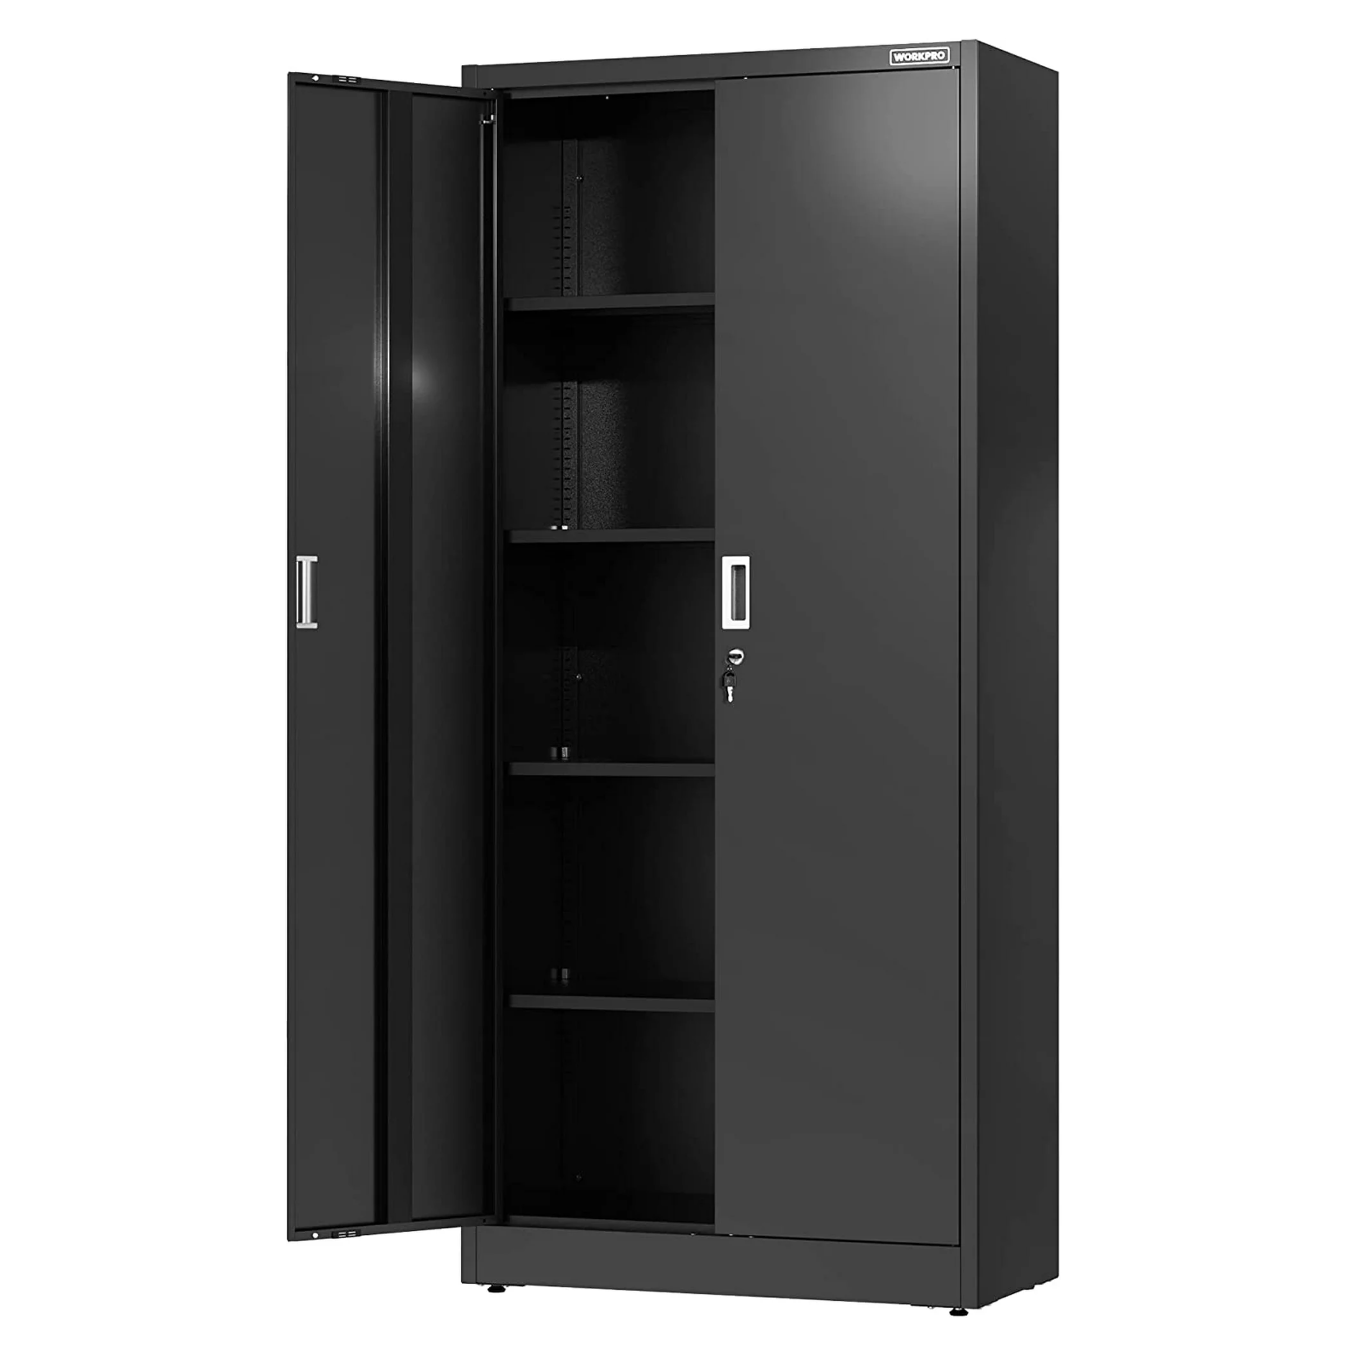 WORKPRO Storage Cabinet, Metal Garage Tall Locking Cabinets with Doors and Shelves for Tools ($159.99)